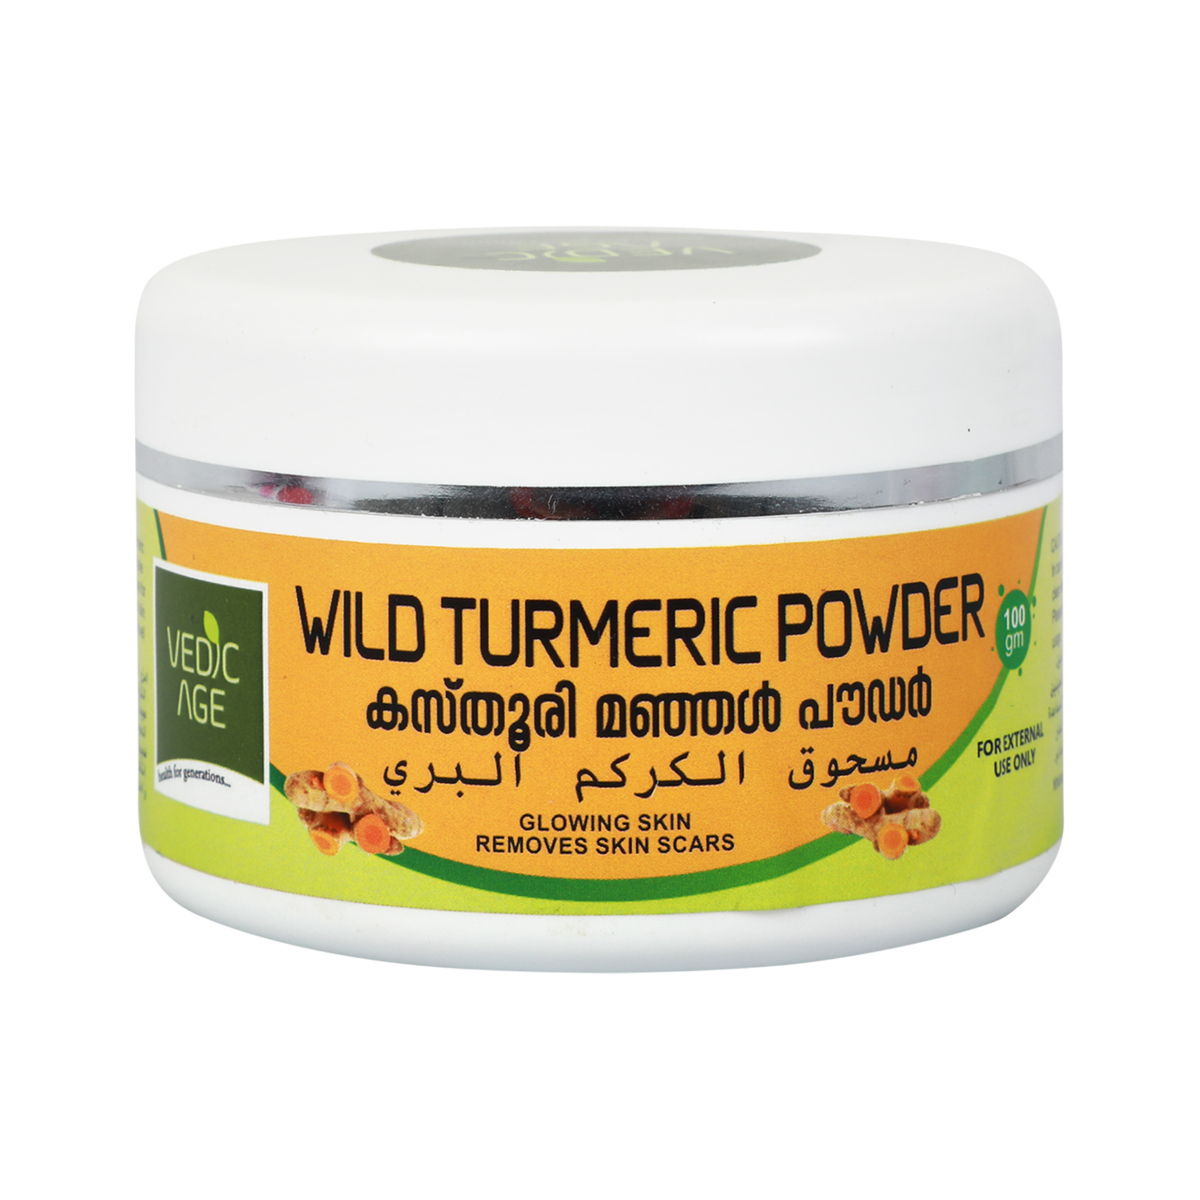 Vedic Age Wild Turmeric Powder for Glowing Skin and Remove Skin Scars, 100 g